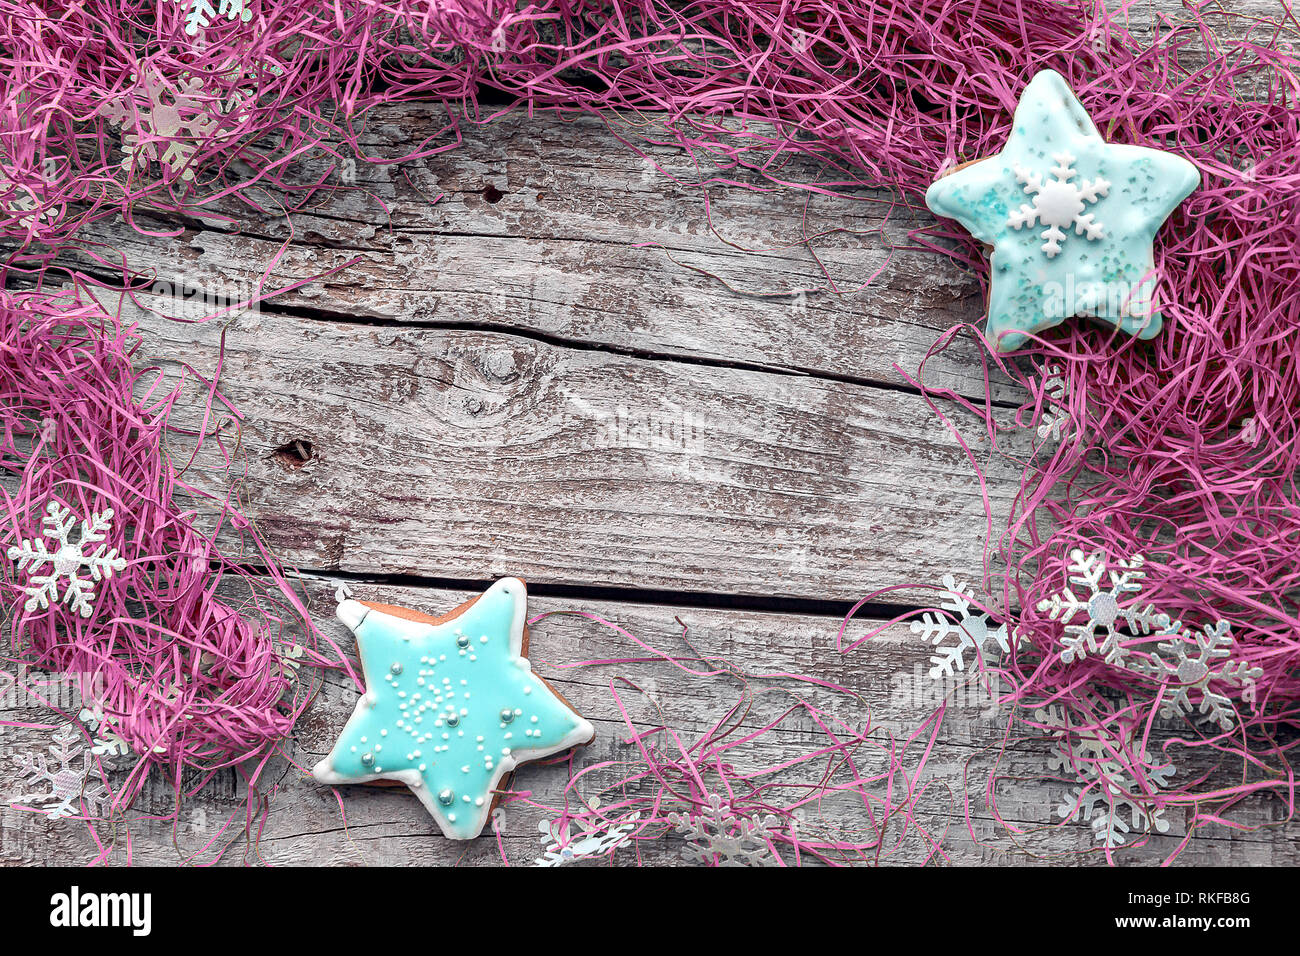 Turquoise star shape with pink decorations on gray wood background with copy space. Stock Photo